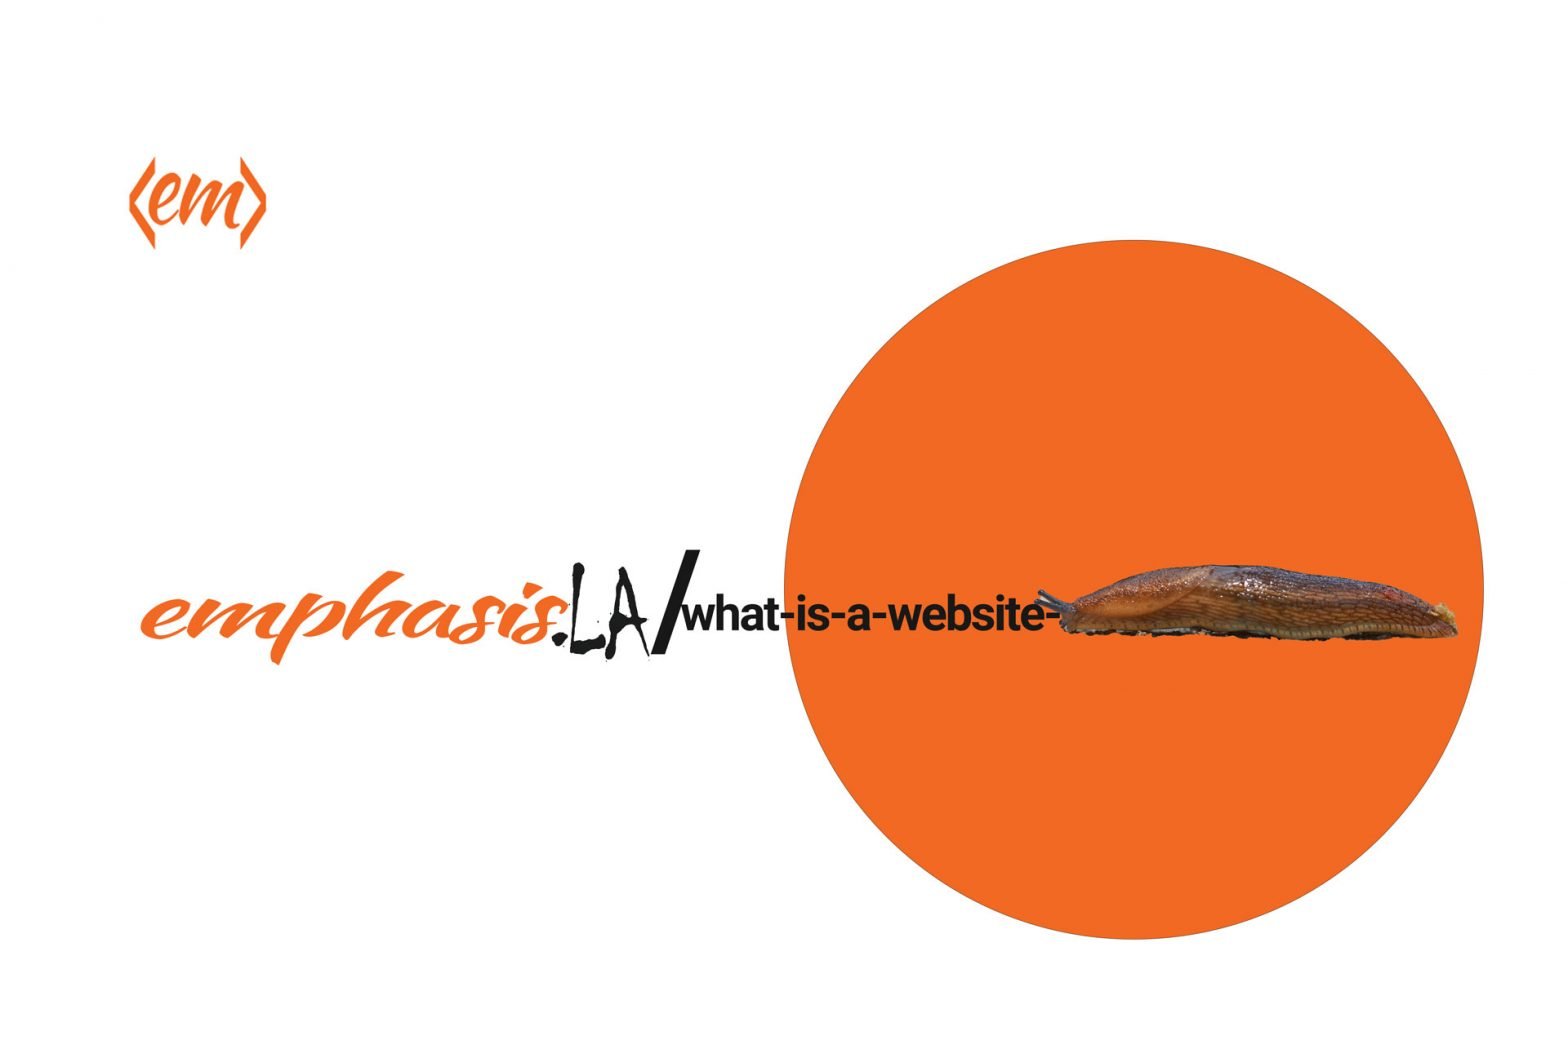 Orange circle in background. Text in foreground: 'emphasis.la/what-is-a-website-' followed by a big slug